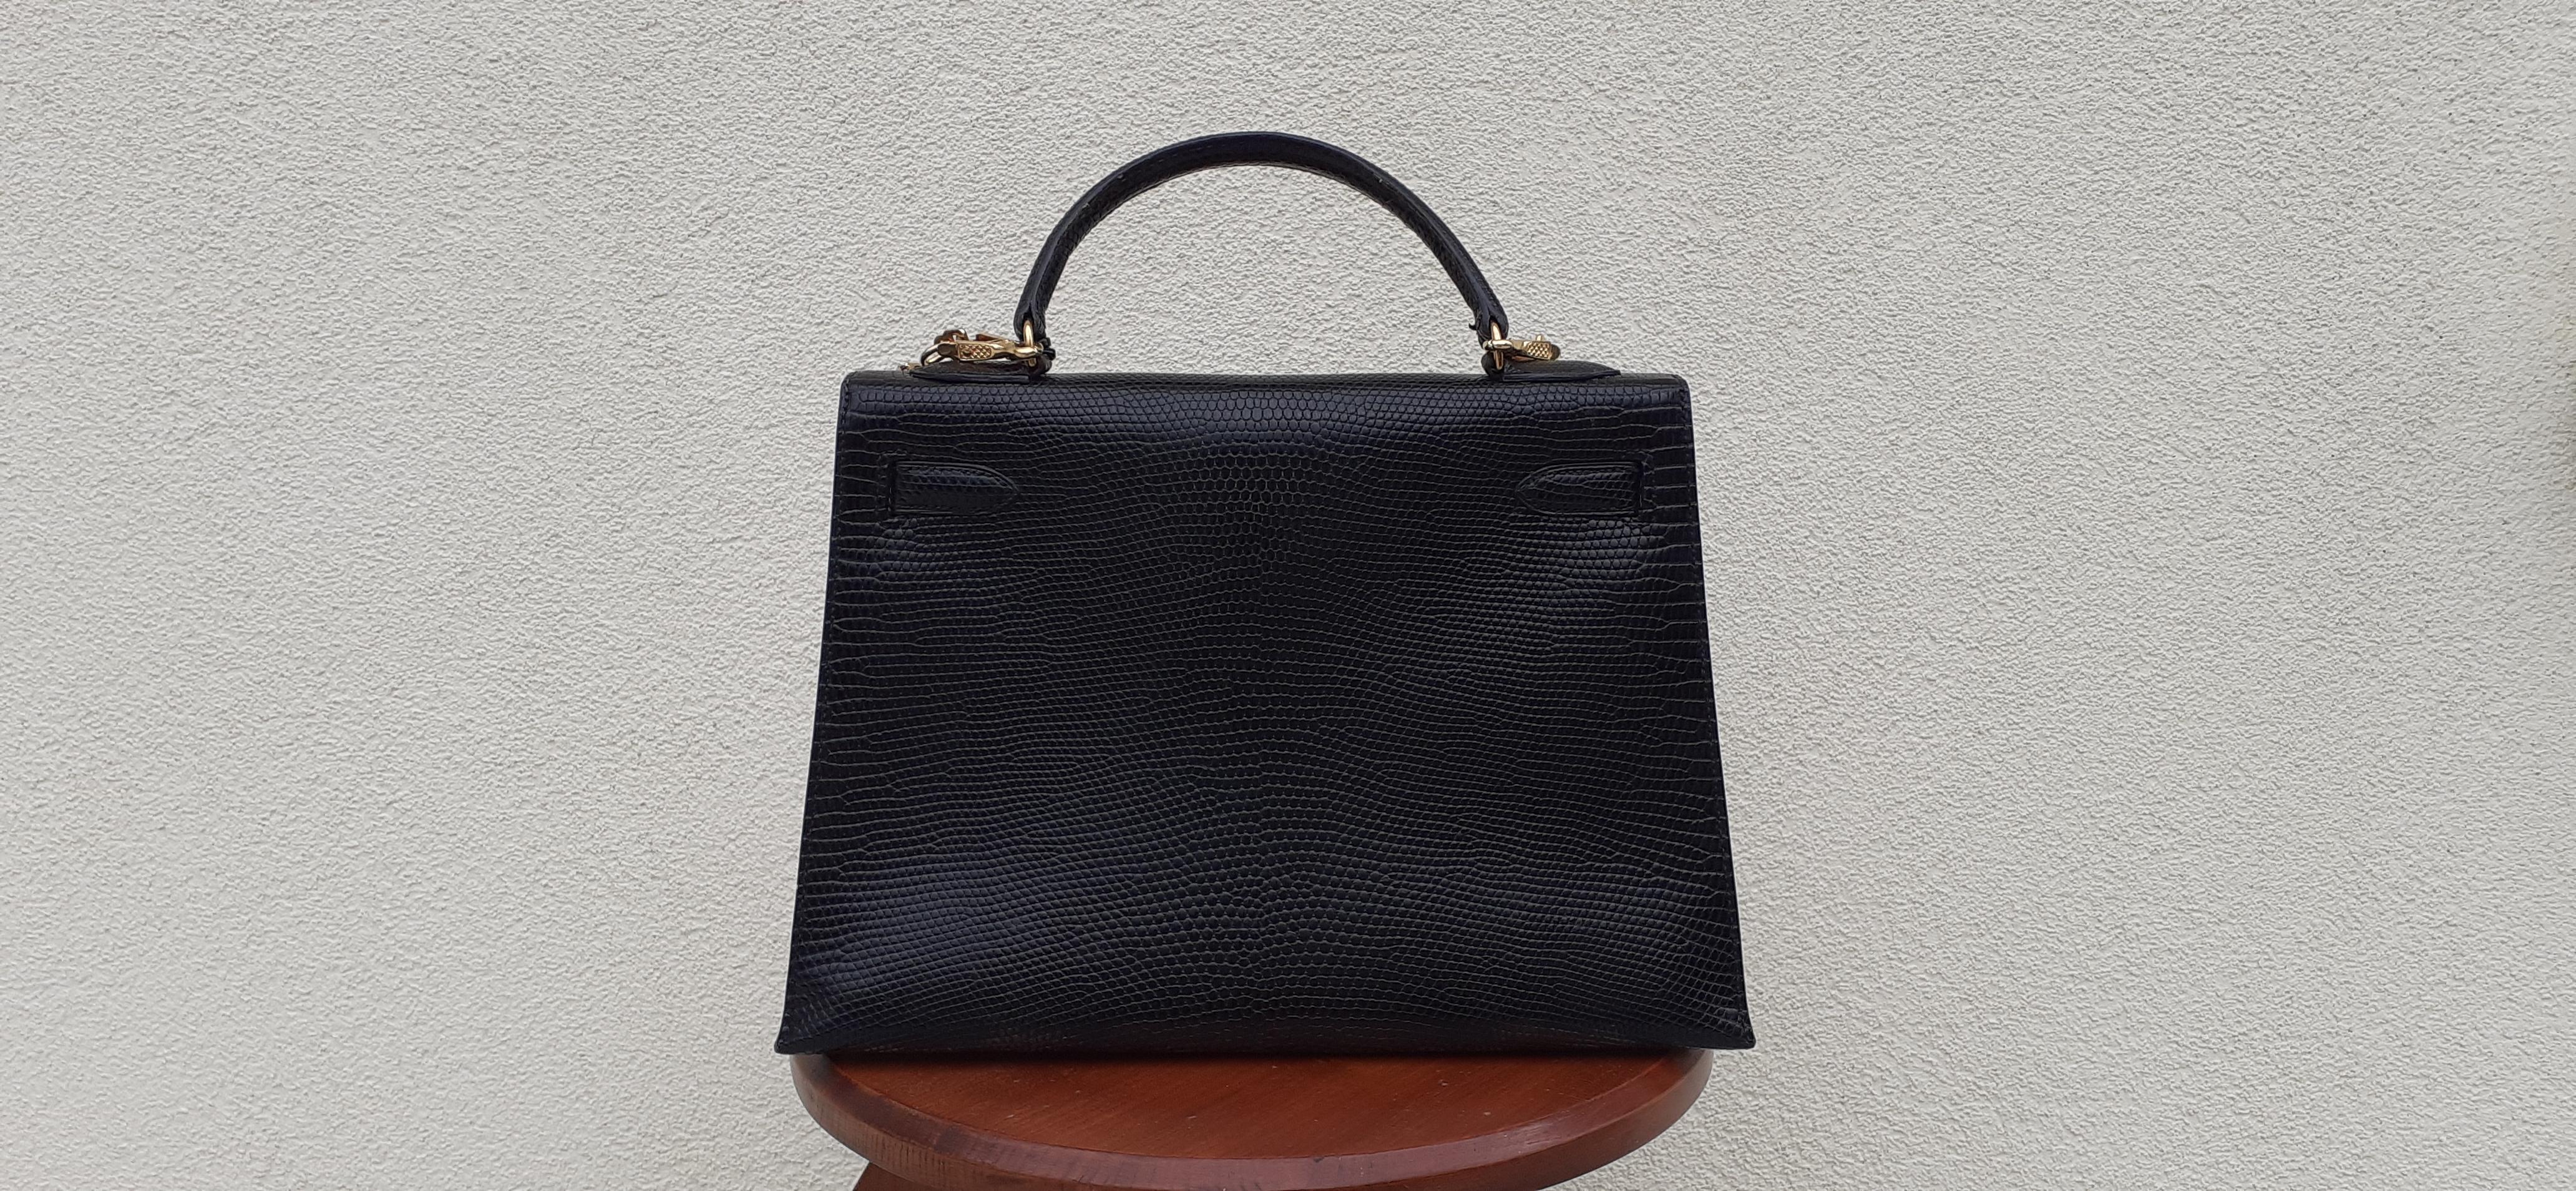 Exceptional Hermès Sellier Kelly Bag Black Lizard and Golden Hdw RARE For Sale 3